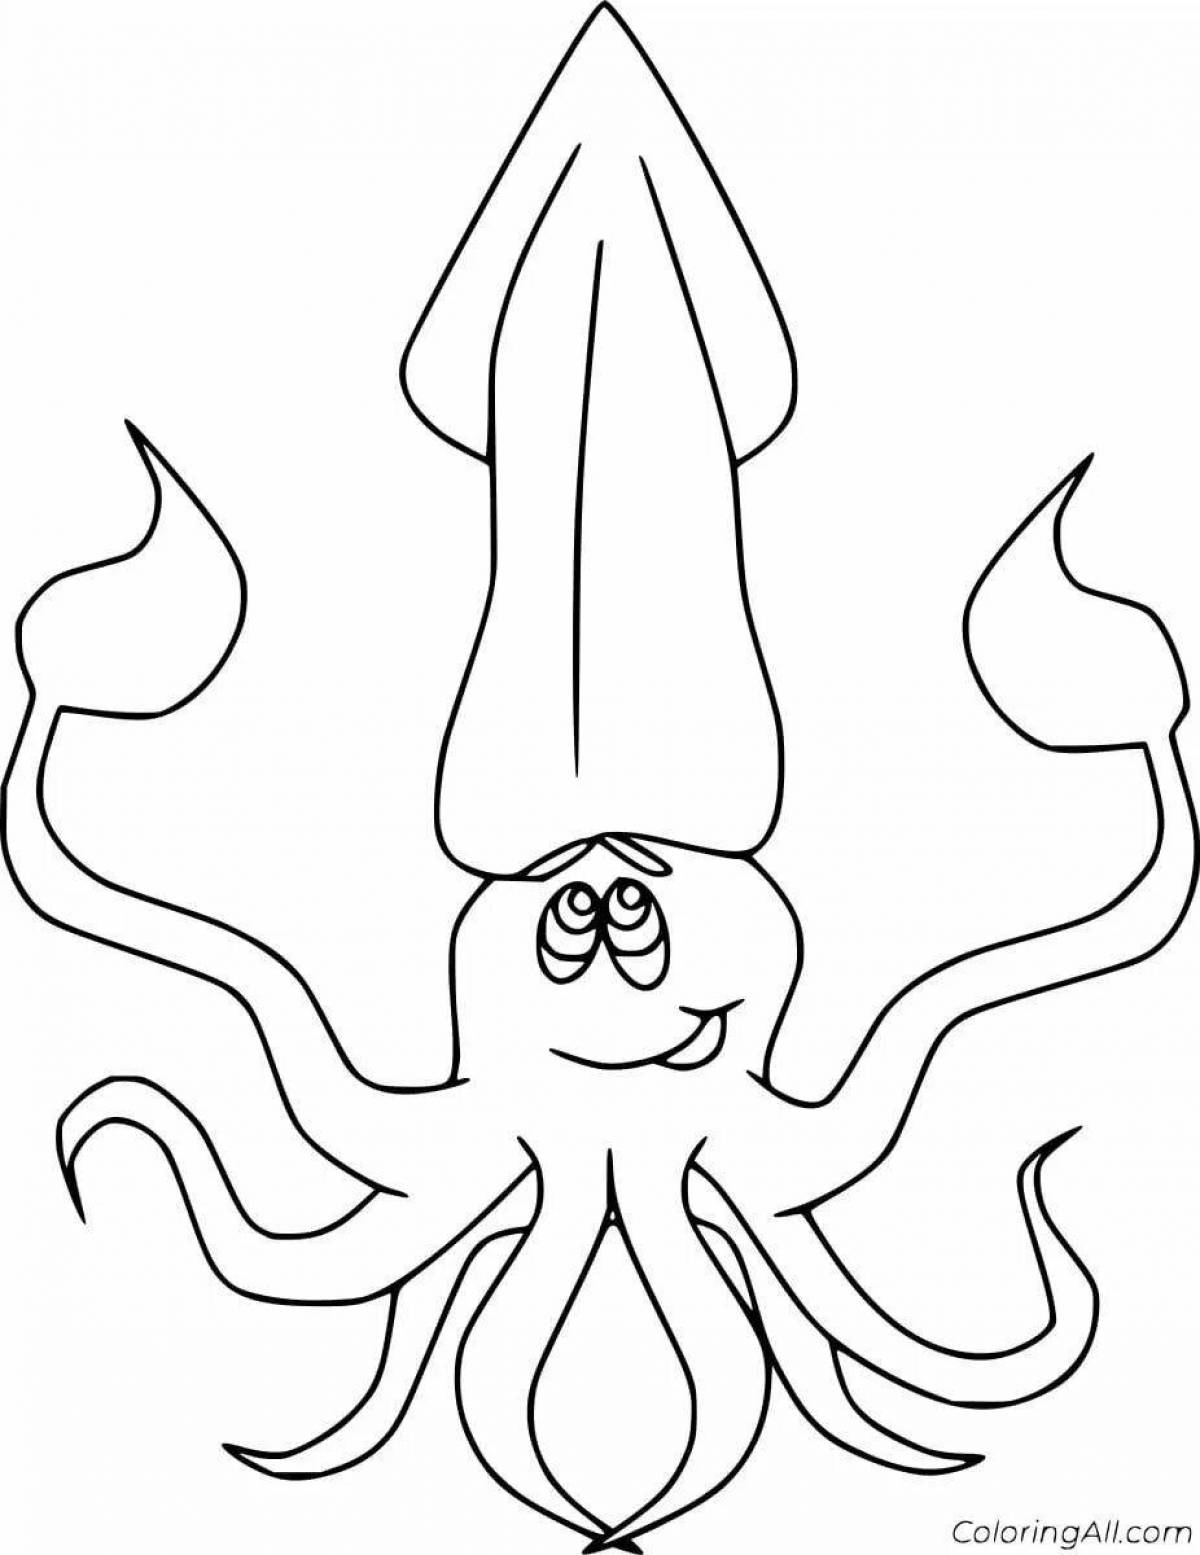 Fun squid coloring for kids